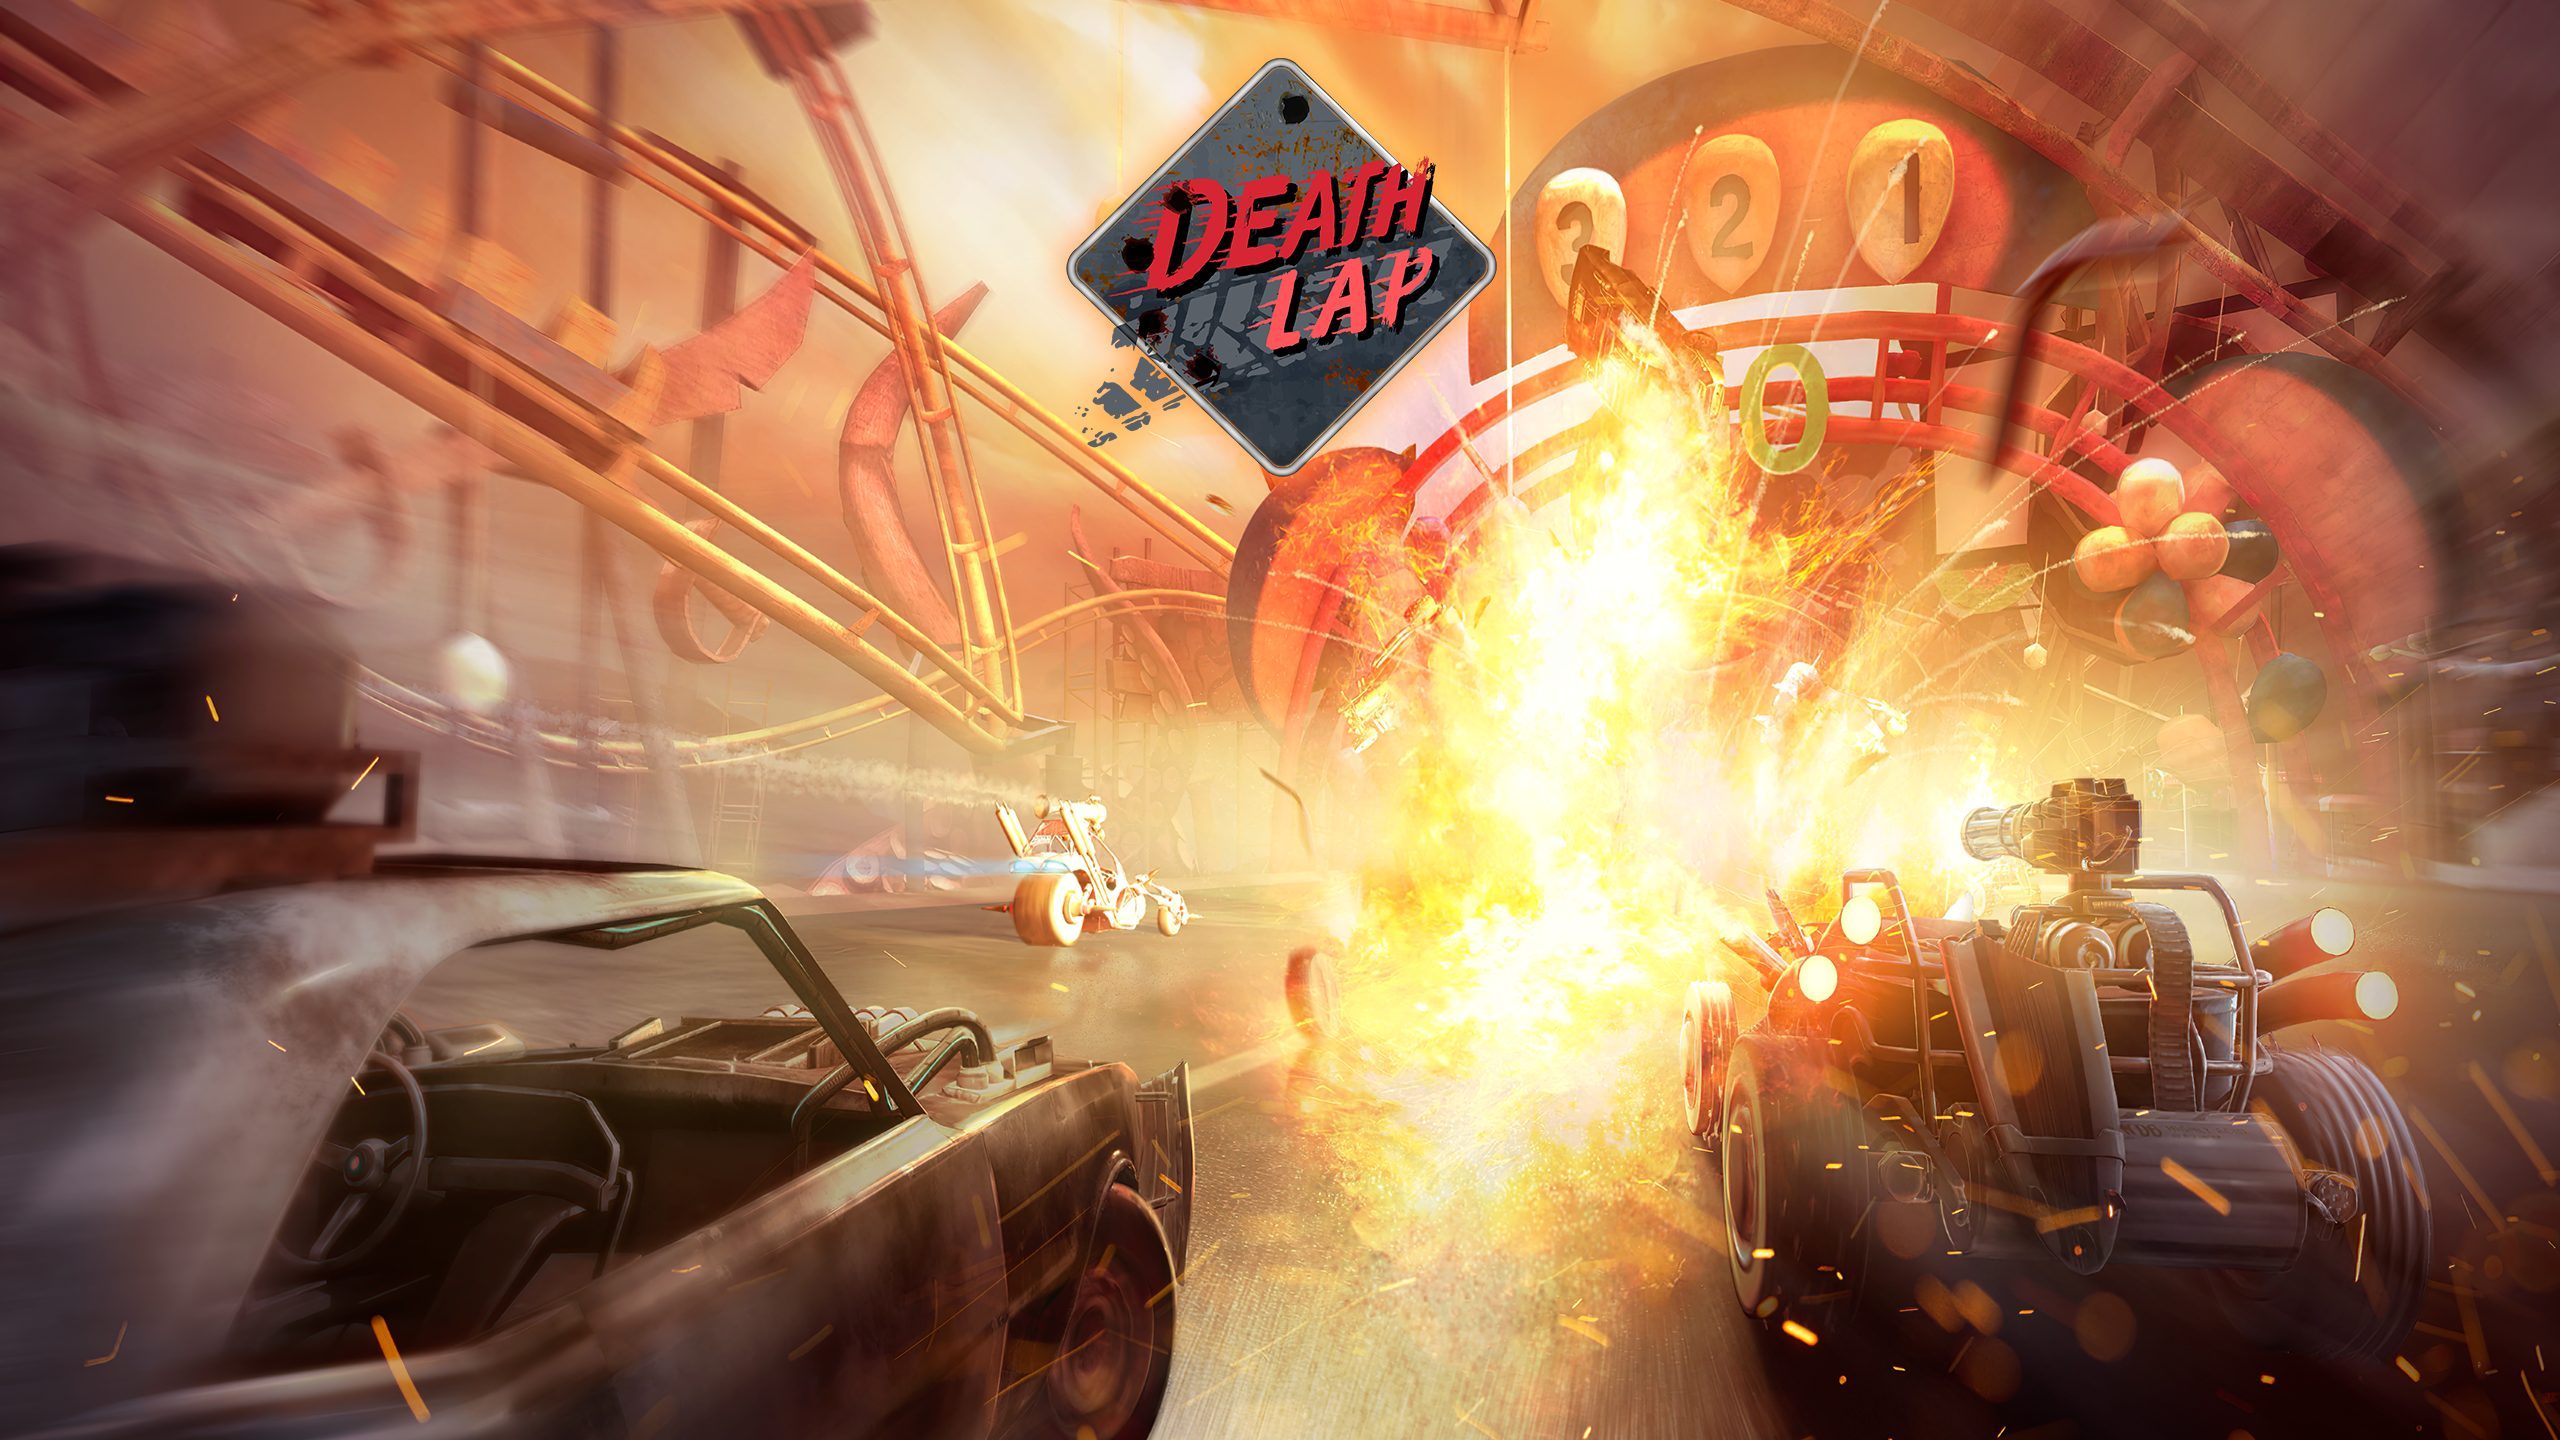 death-lap-is-a-first-person-shooter-racer-coming-to-quest-rift